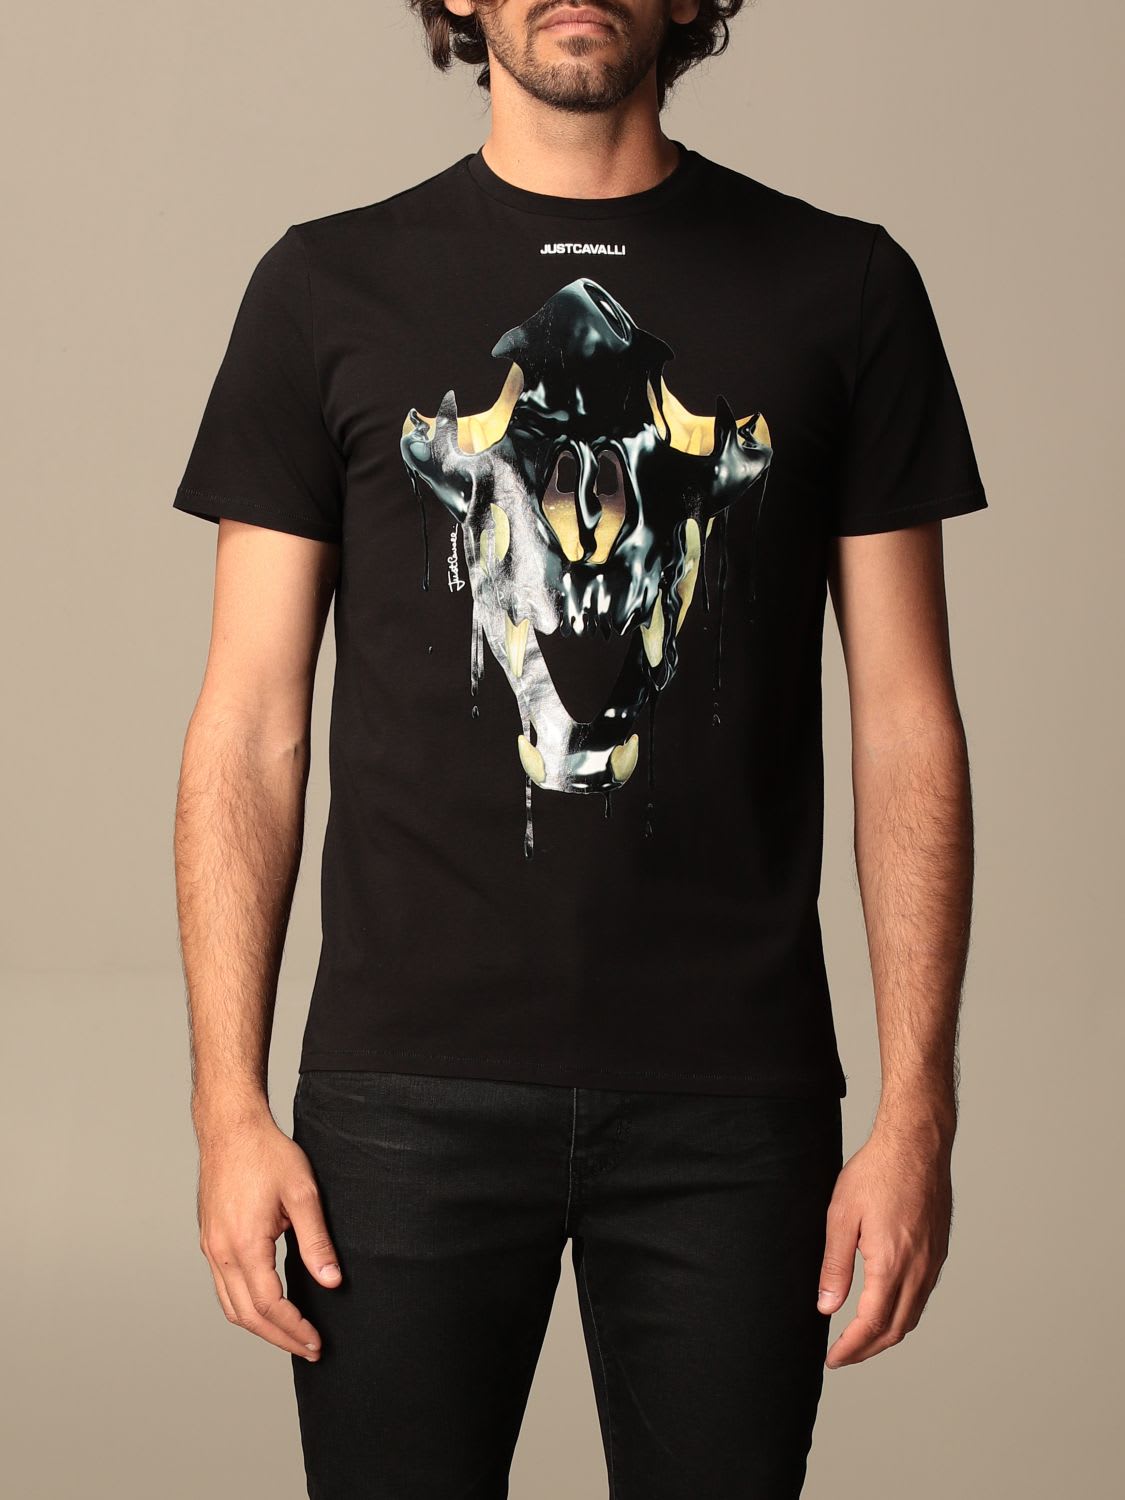 JUST CAVALLI T-SHIRT IN COTTON WITH PRINT,S01GC0661 N20663 900